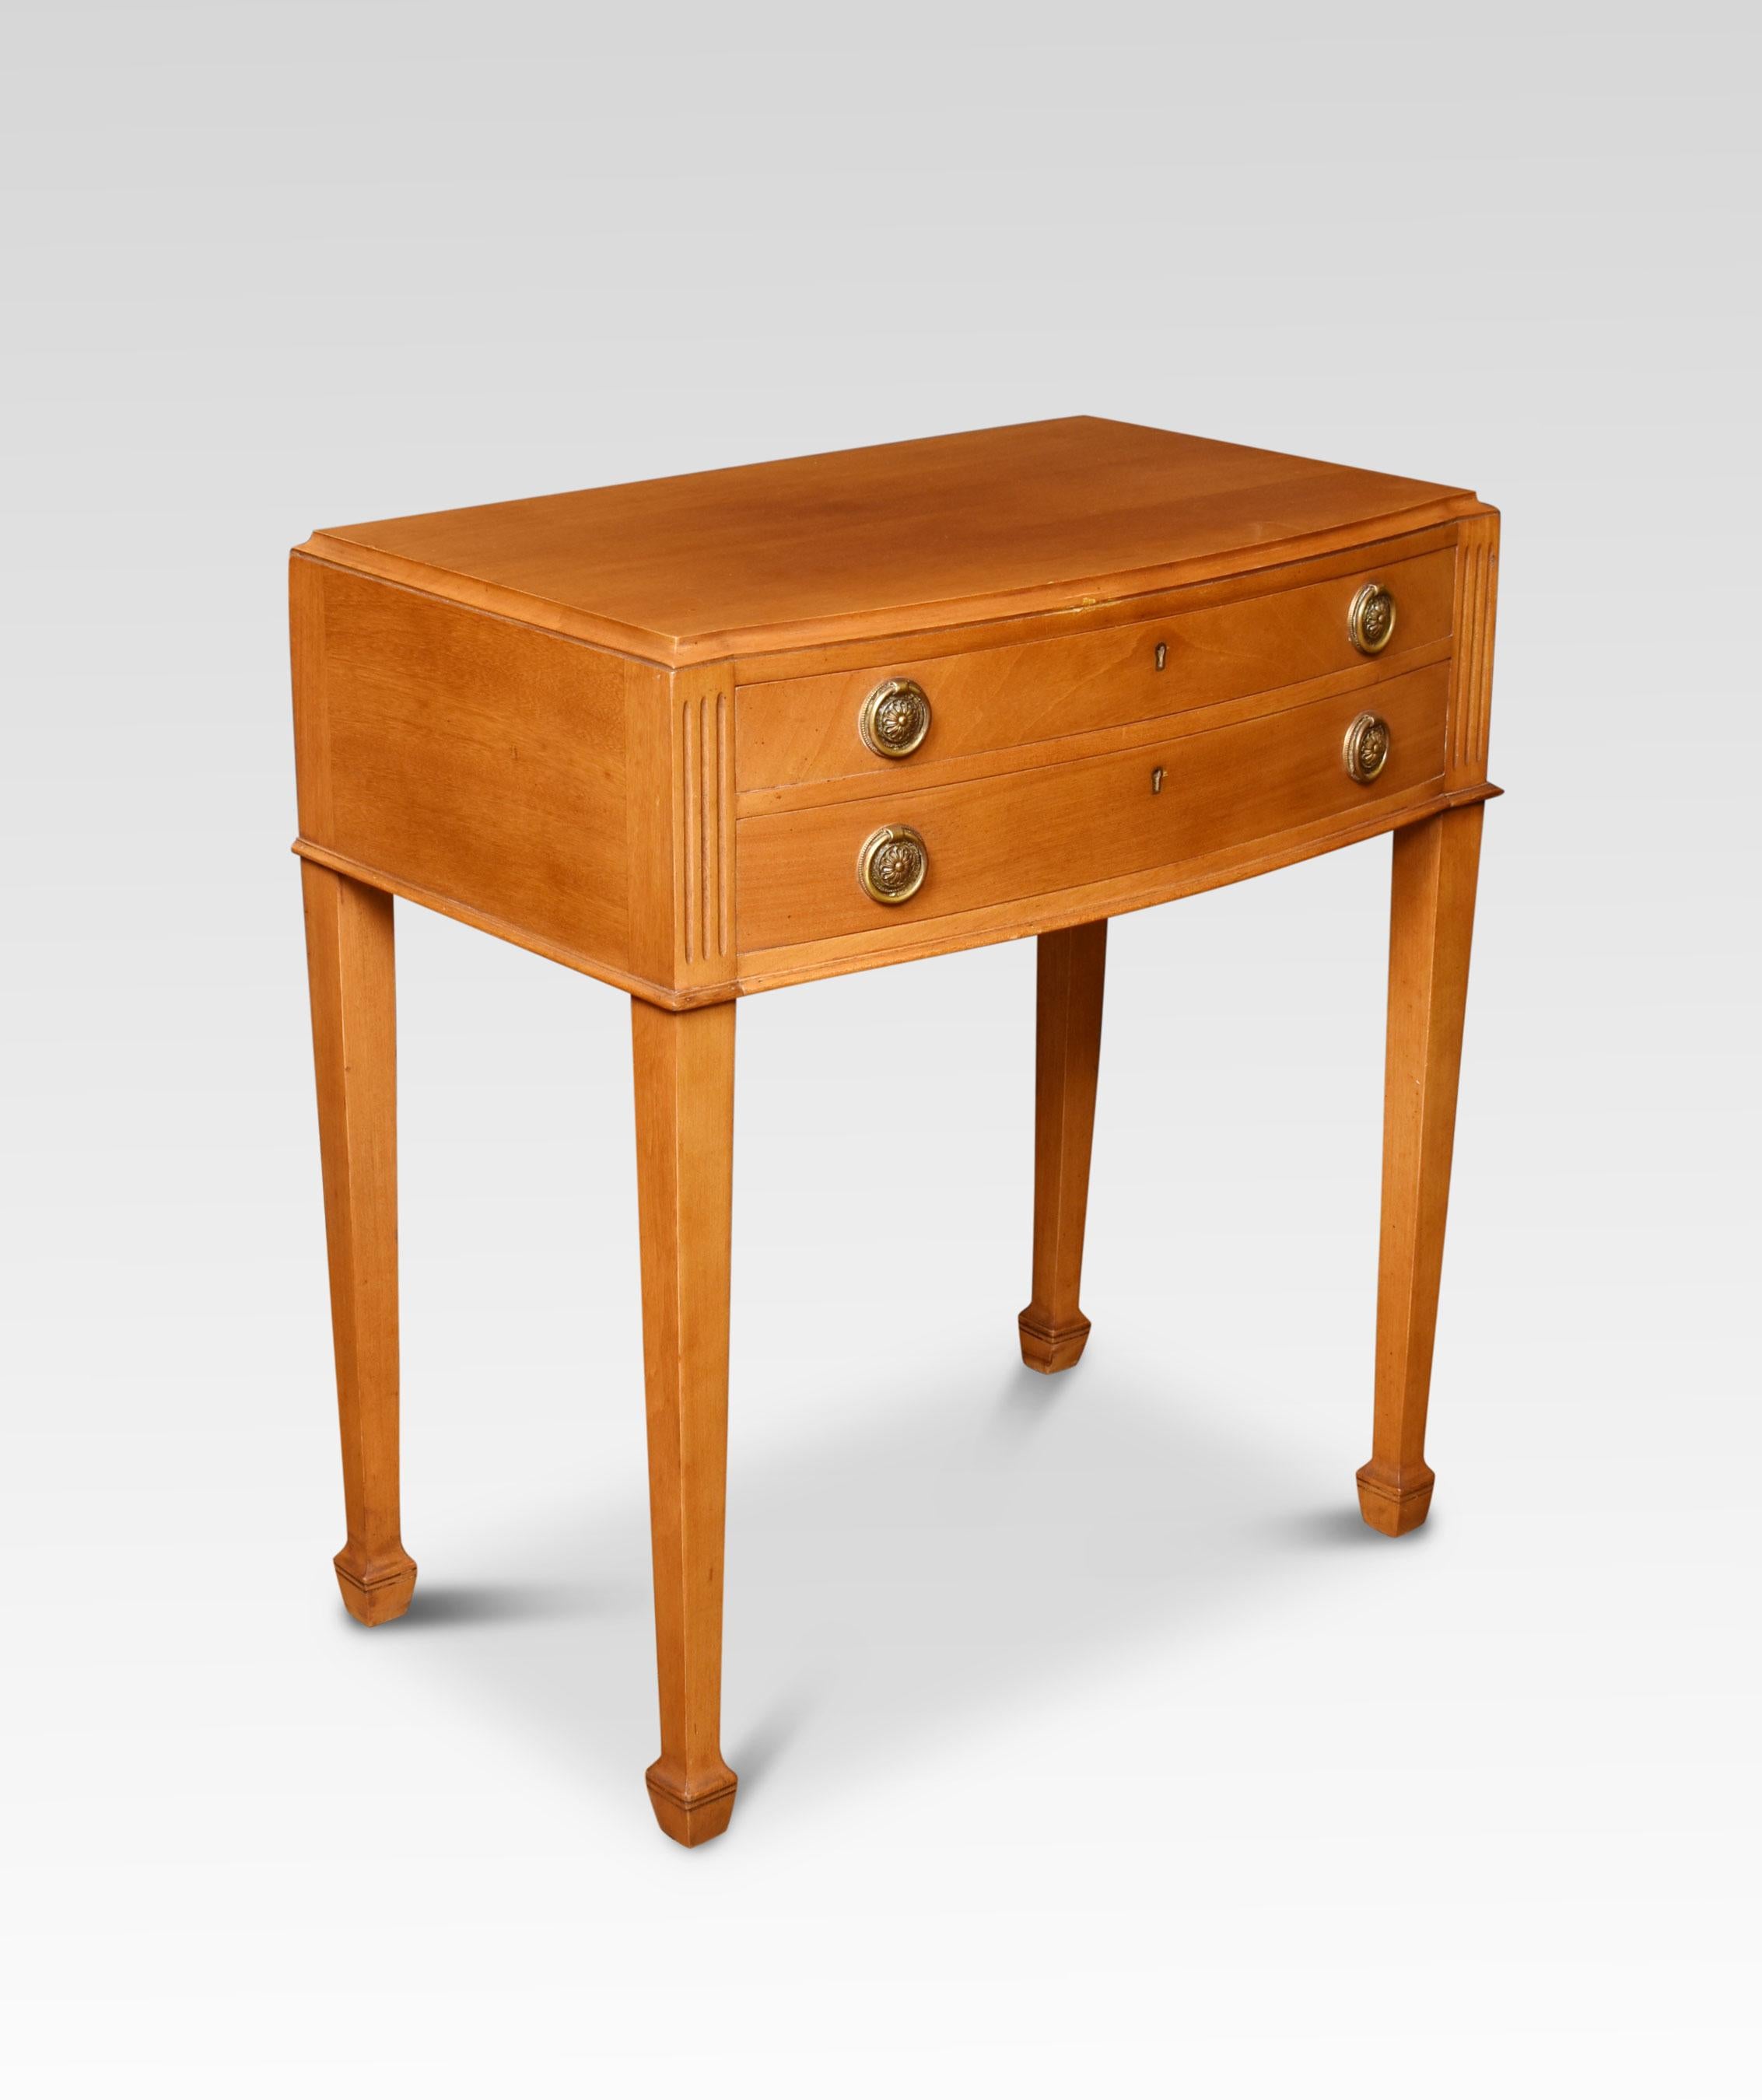 Bow fronted walnut two drawer canteen, by George Ellis ltd Sheffield in the sweet briar pattern. Eight places 79 pieces. All raised up on tapered legs terminating in spade feet.
Dimensions
Height 30.5 inches
Width 28 inches
Depth 17.5 inches.